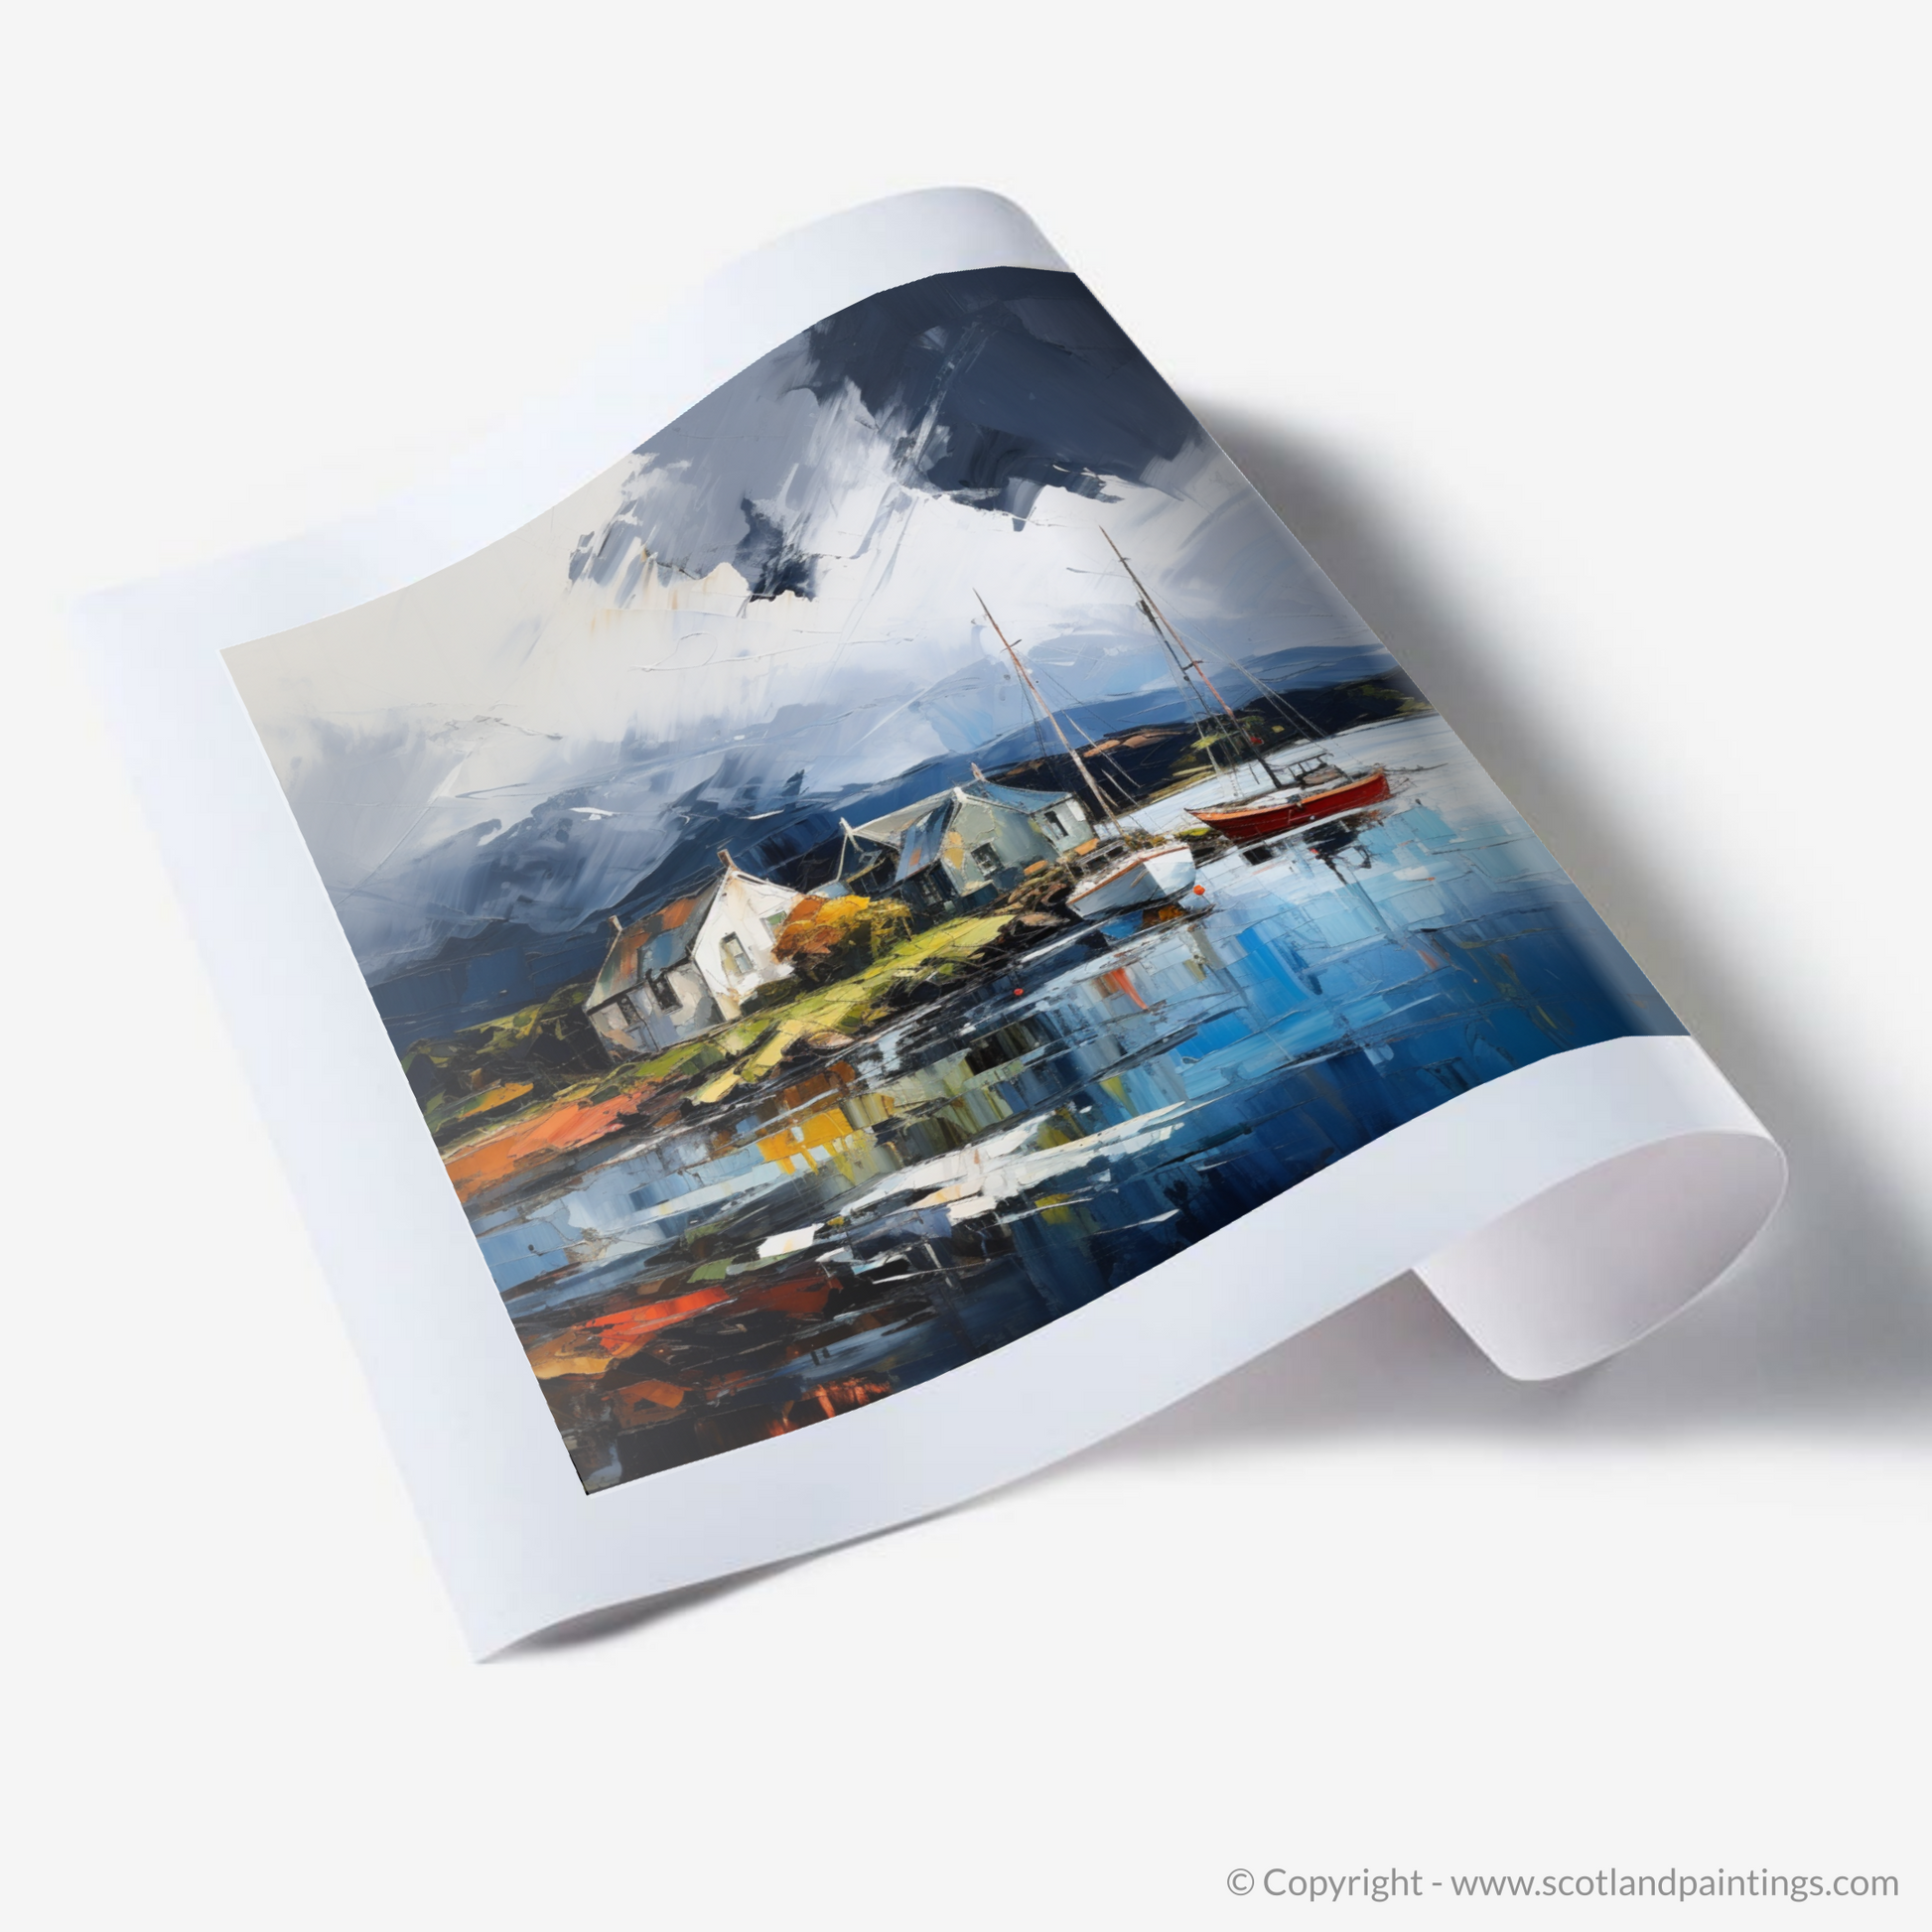 Art Print of Port Appin Harbour with a stormy sky